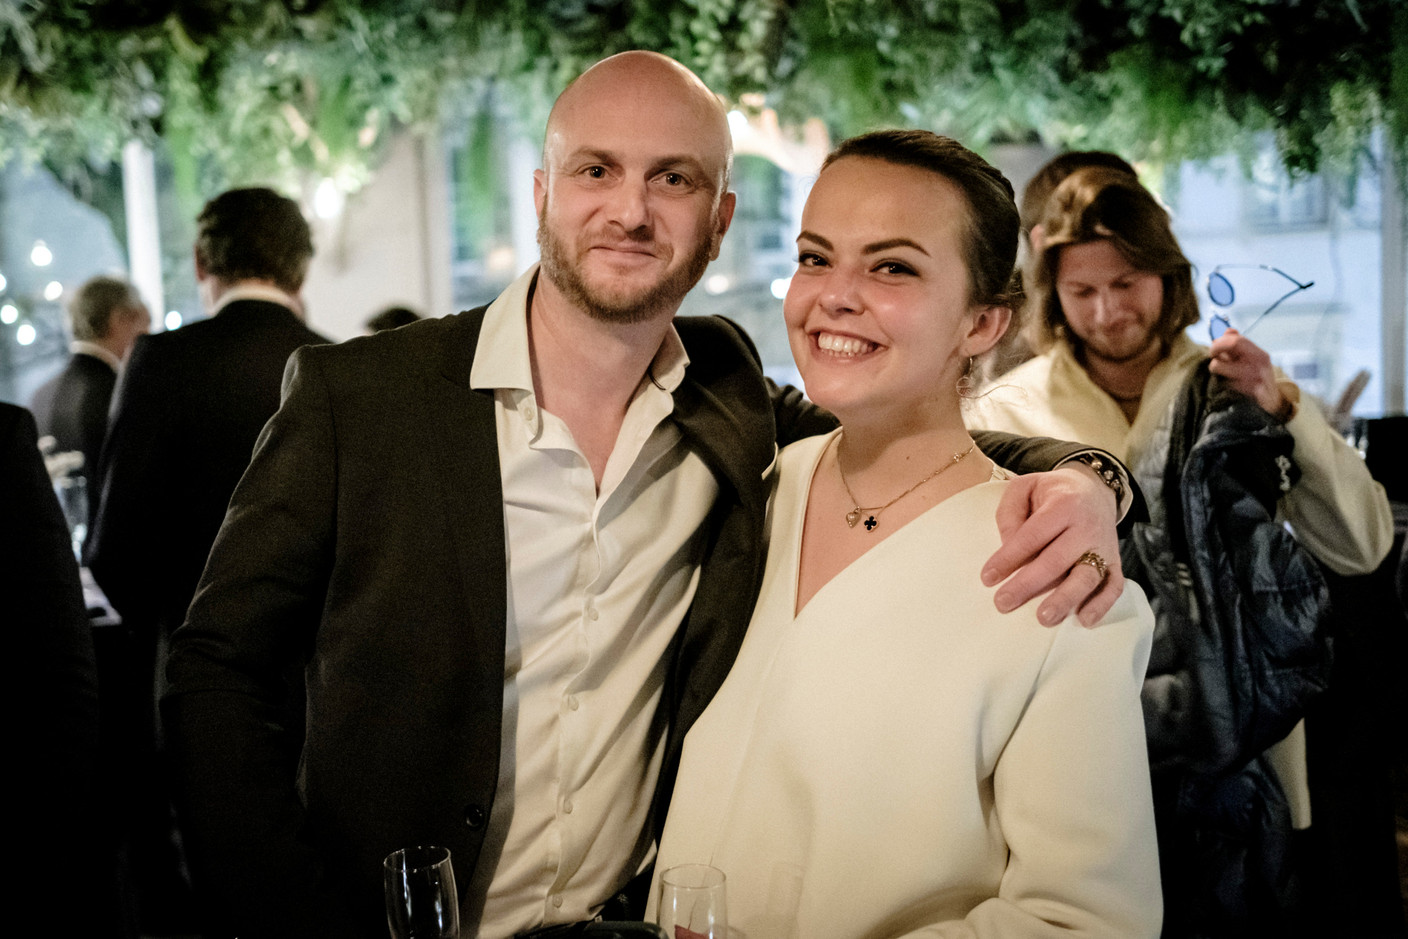 Hugo Dumas (Mazars) and Ilana Devillers (F4A) at the Luxembourg Association of Family Offices (LAFO) winter 2023 cocktail, which took place on 8 February 2023 at Hertz PopUp. Photo: Jan Hanrion for LAFO